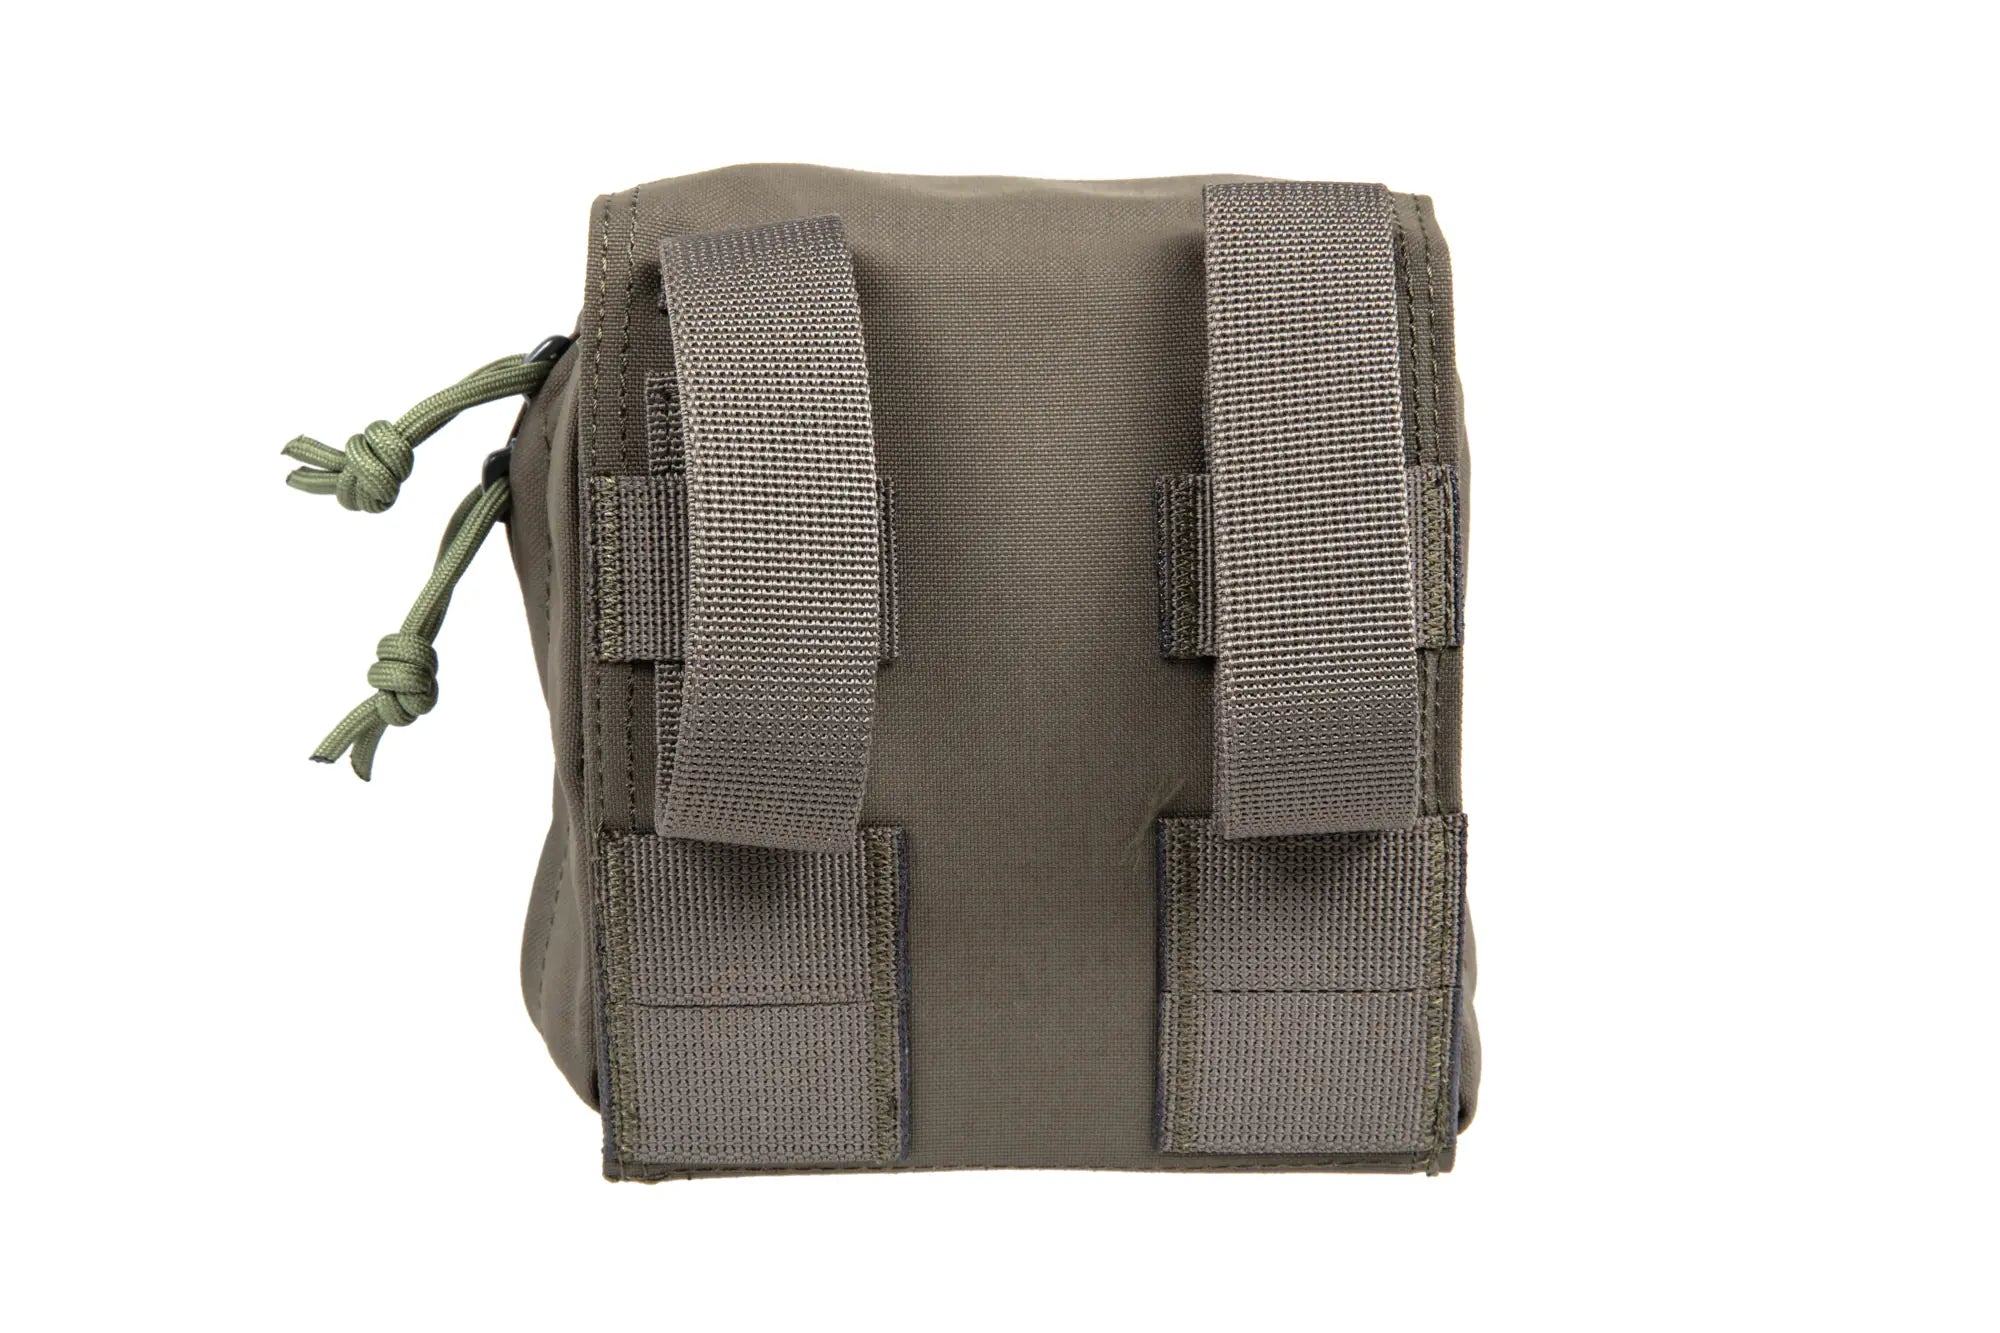 First aid kit with Molle panel Wosport Ranger Green-2